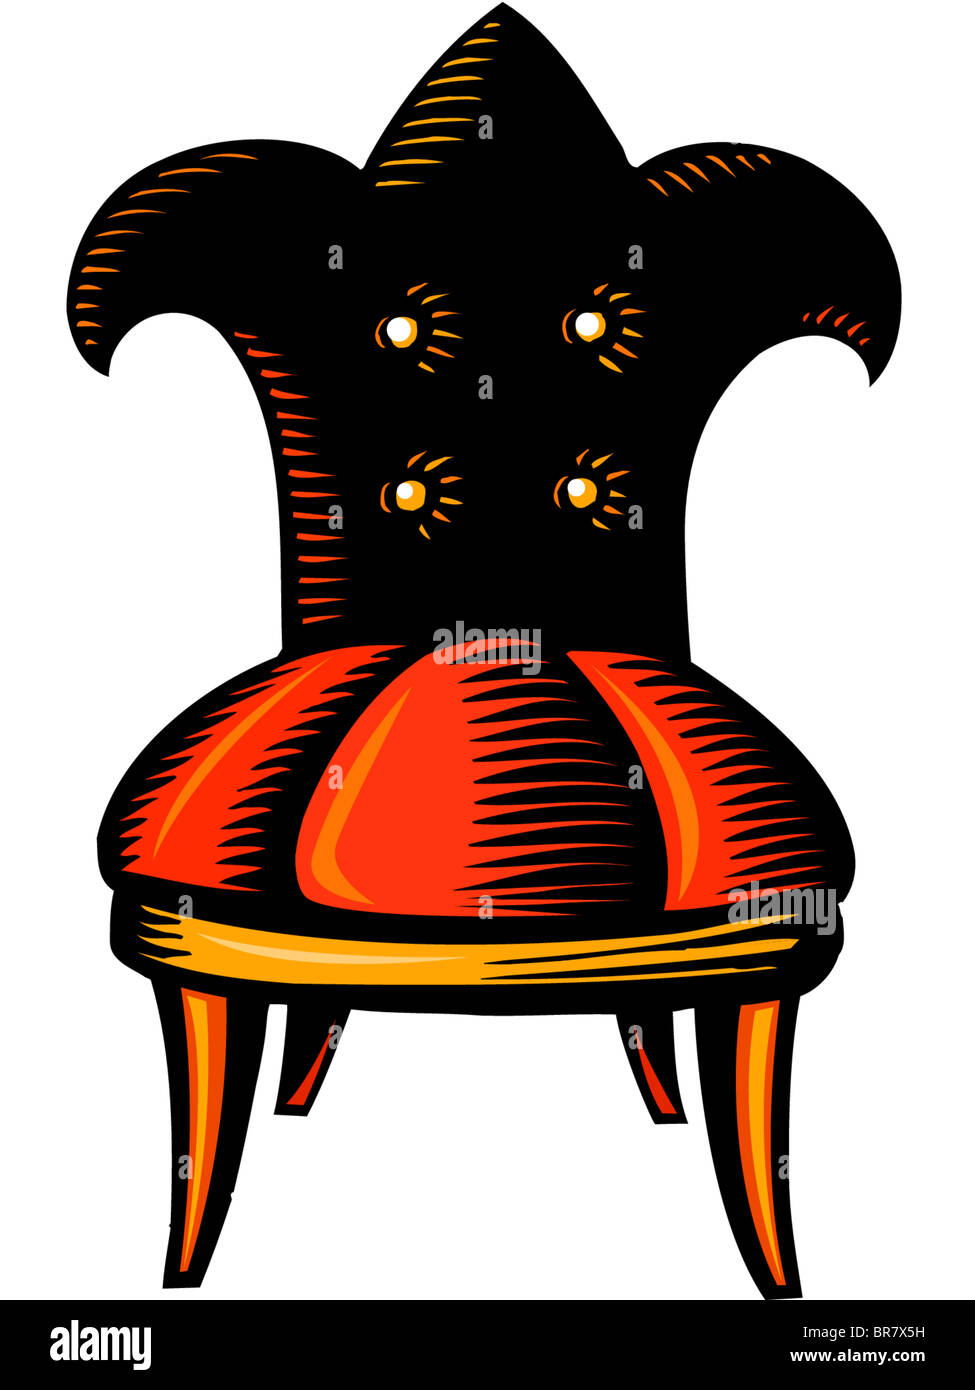 Illustration of a jesters chair Stock Photo